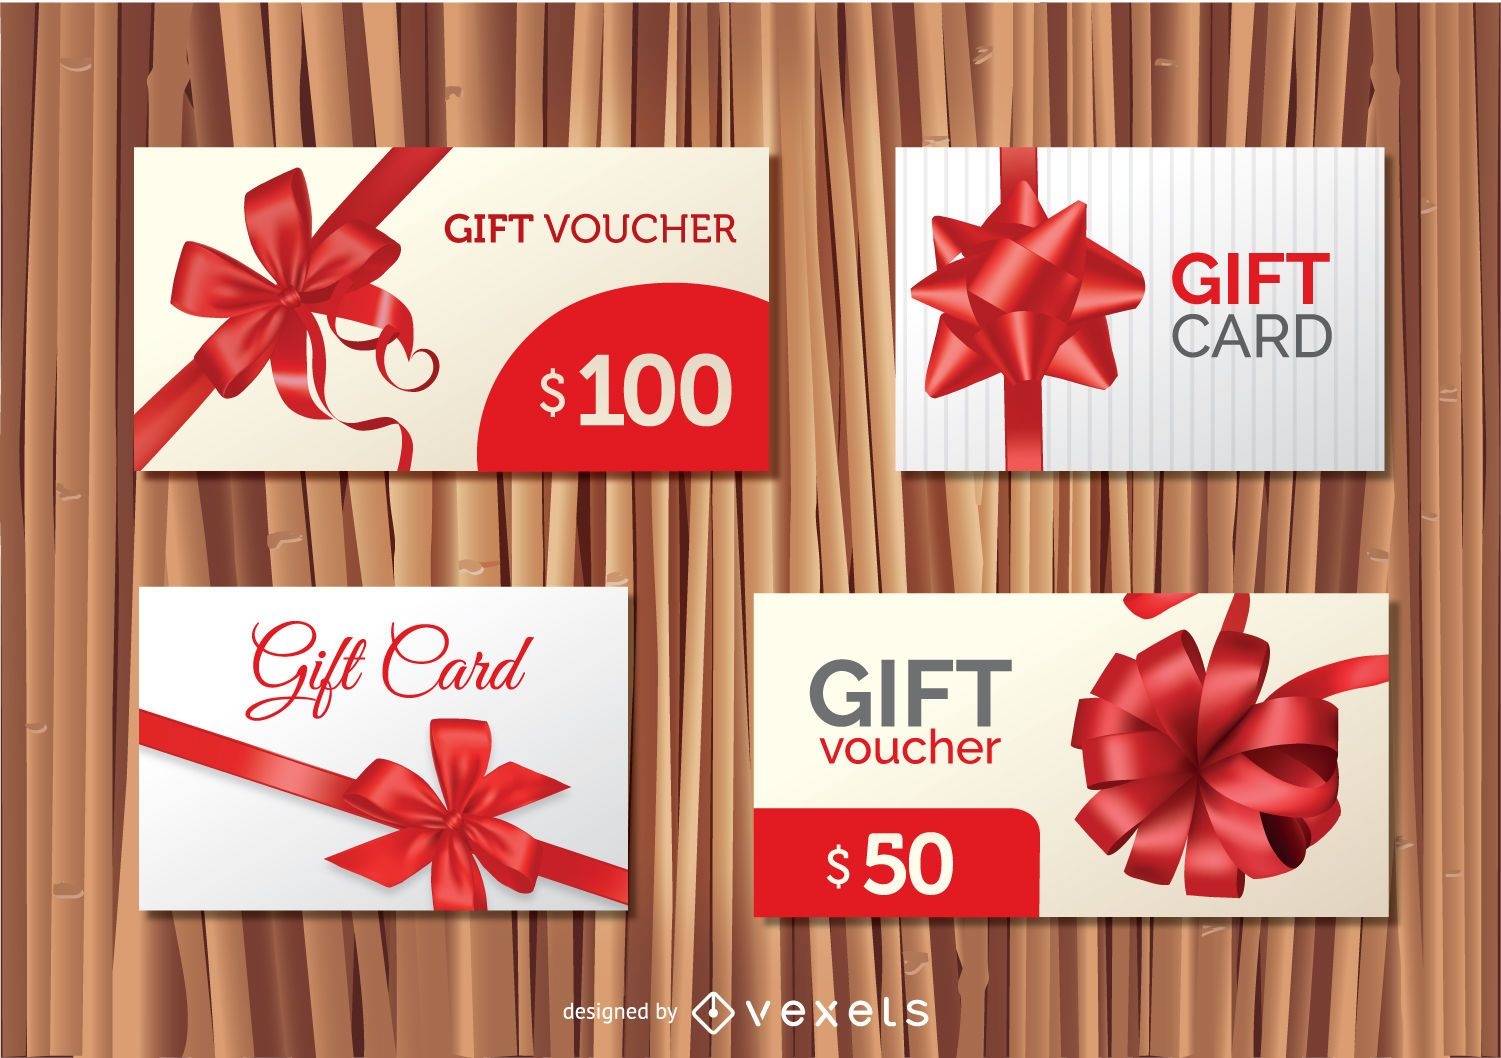 4 Gift Cards designs